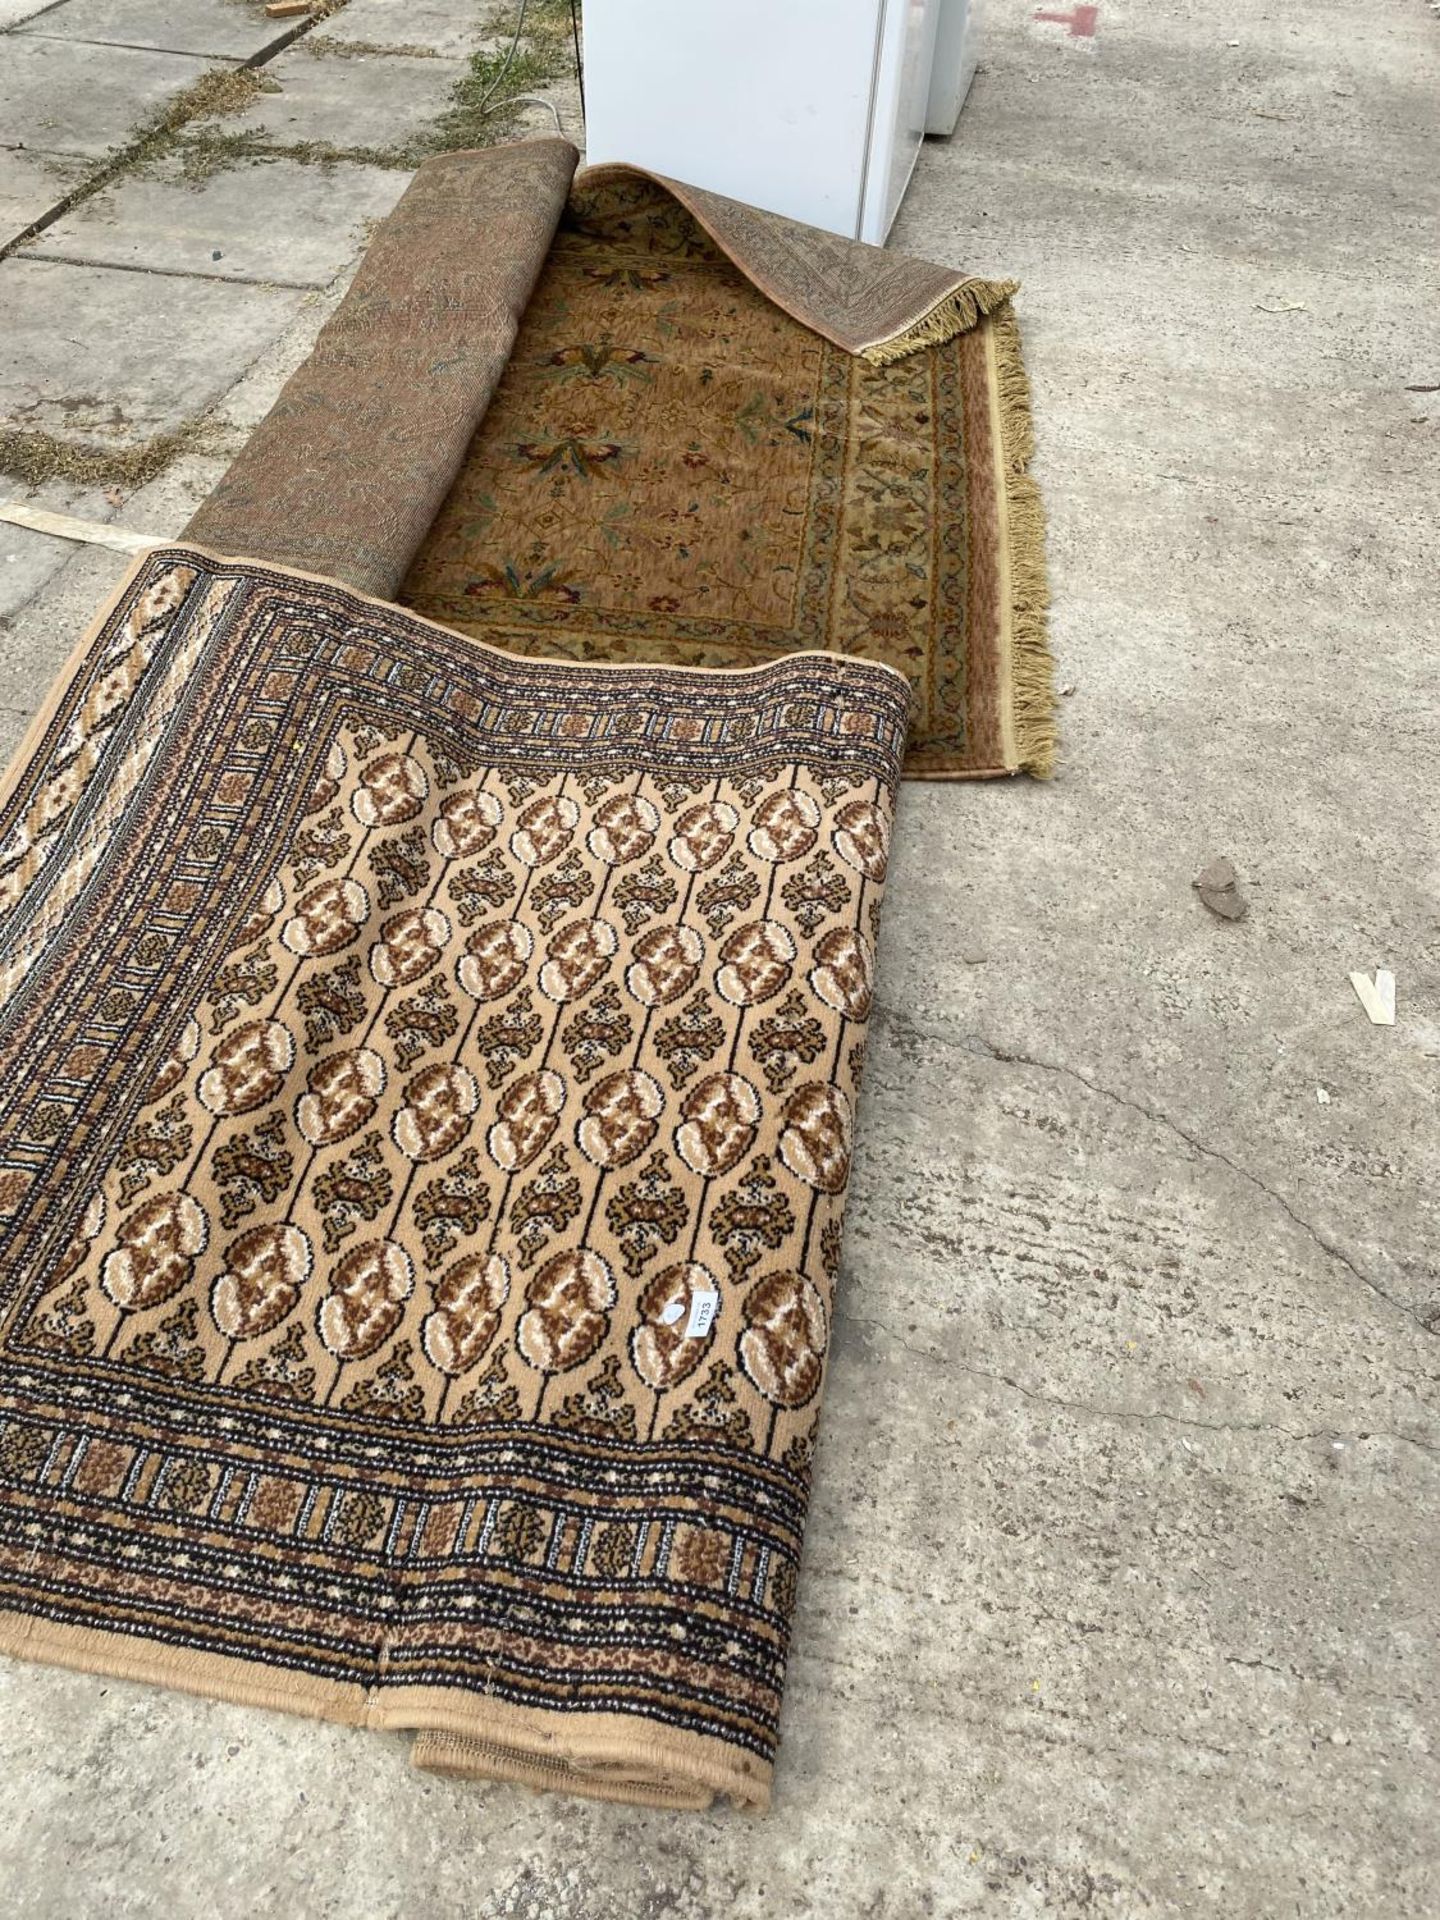 TWO BROWN PATTERNED RUGS